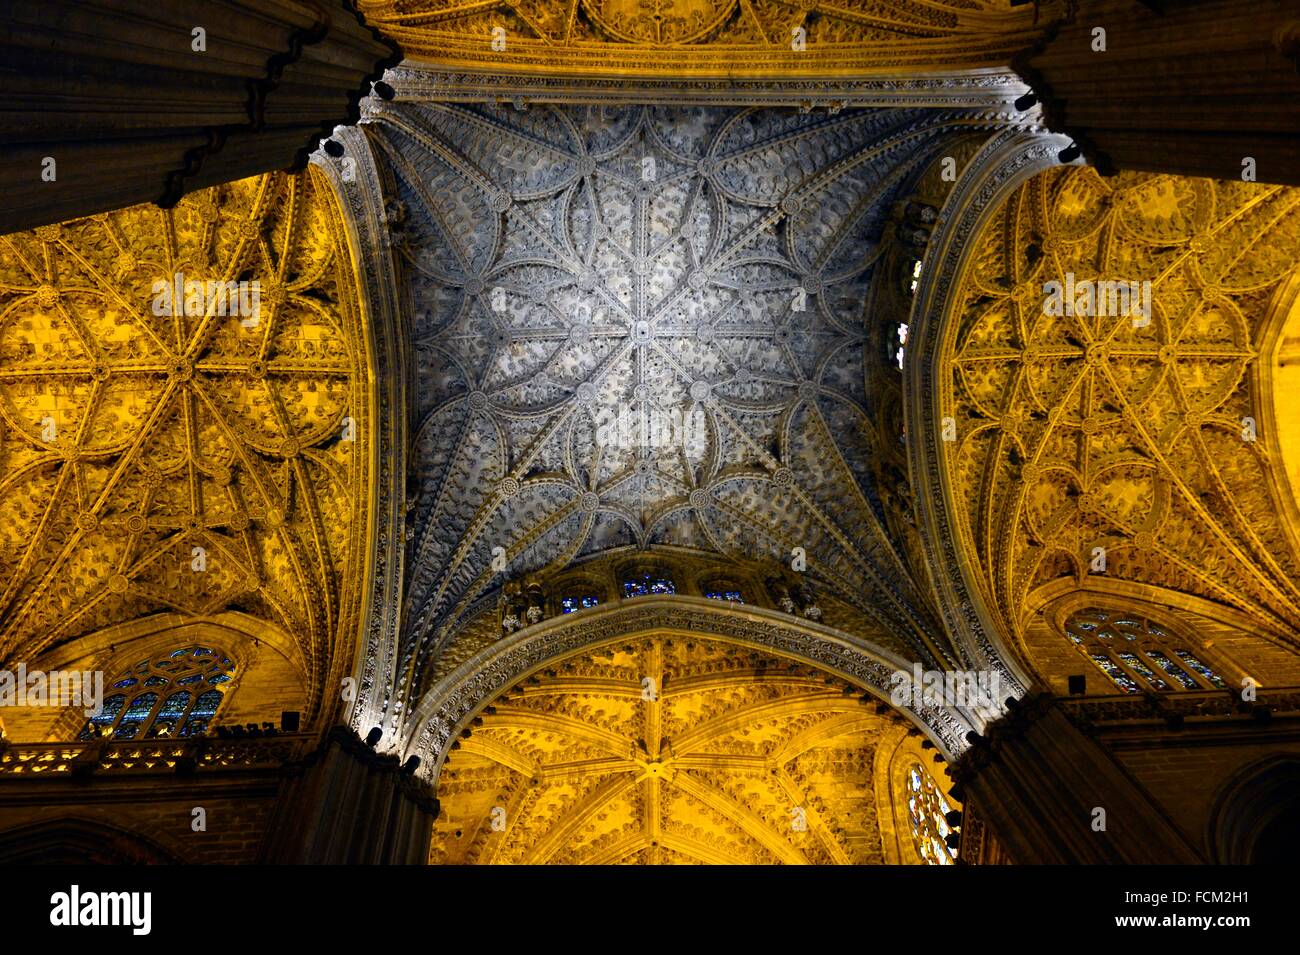 Seville Cathedral celling, Spain. Stock Photo